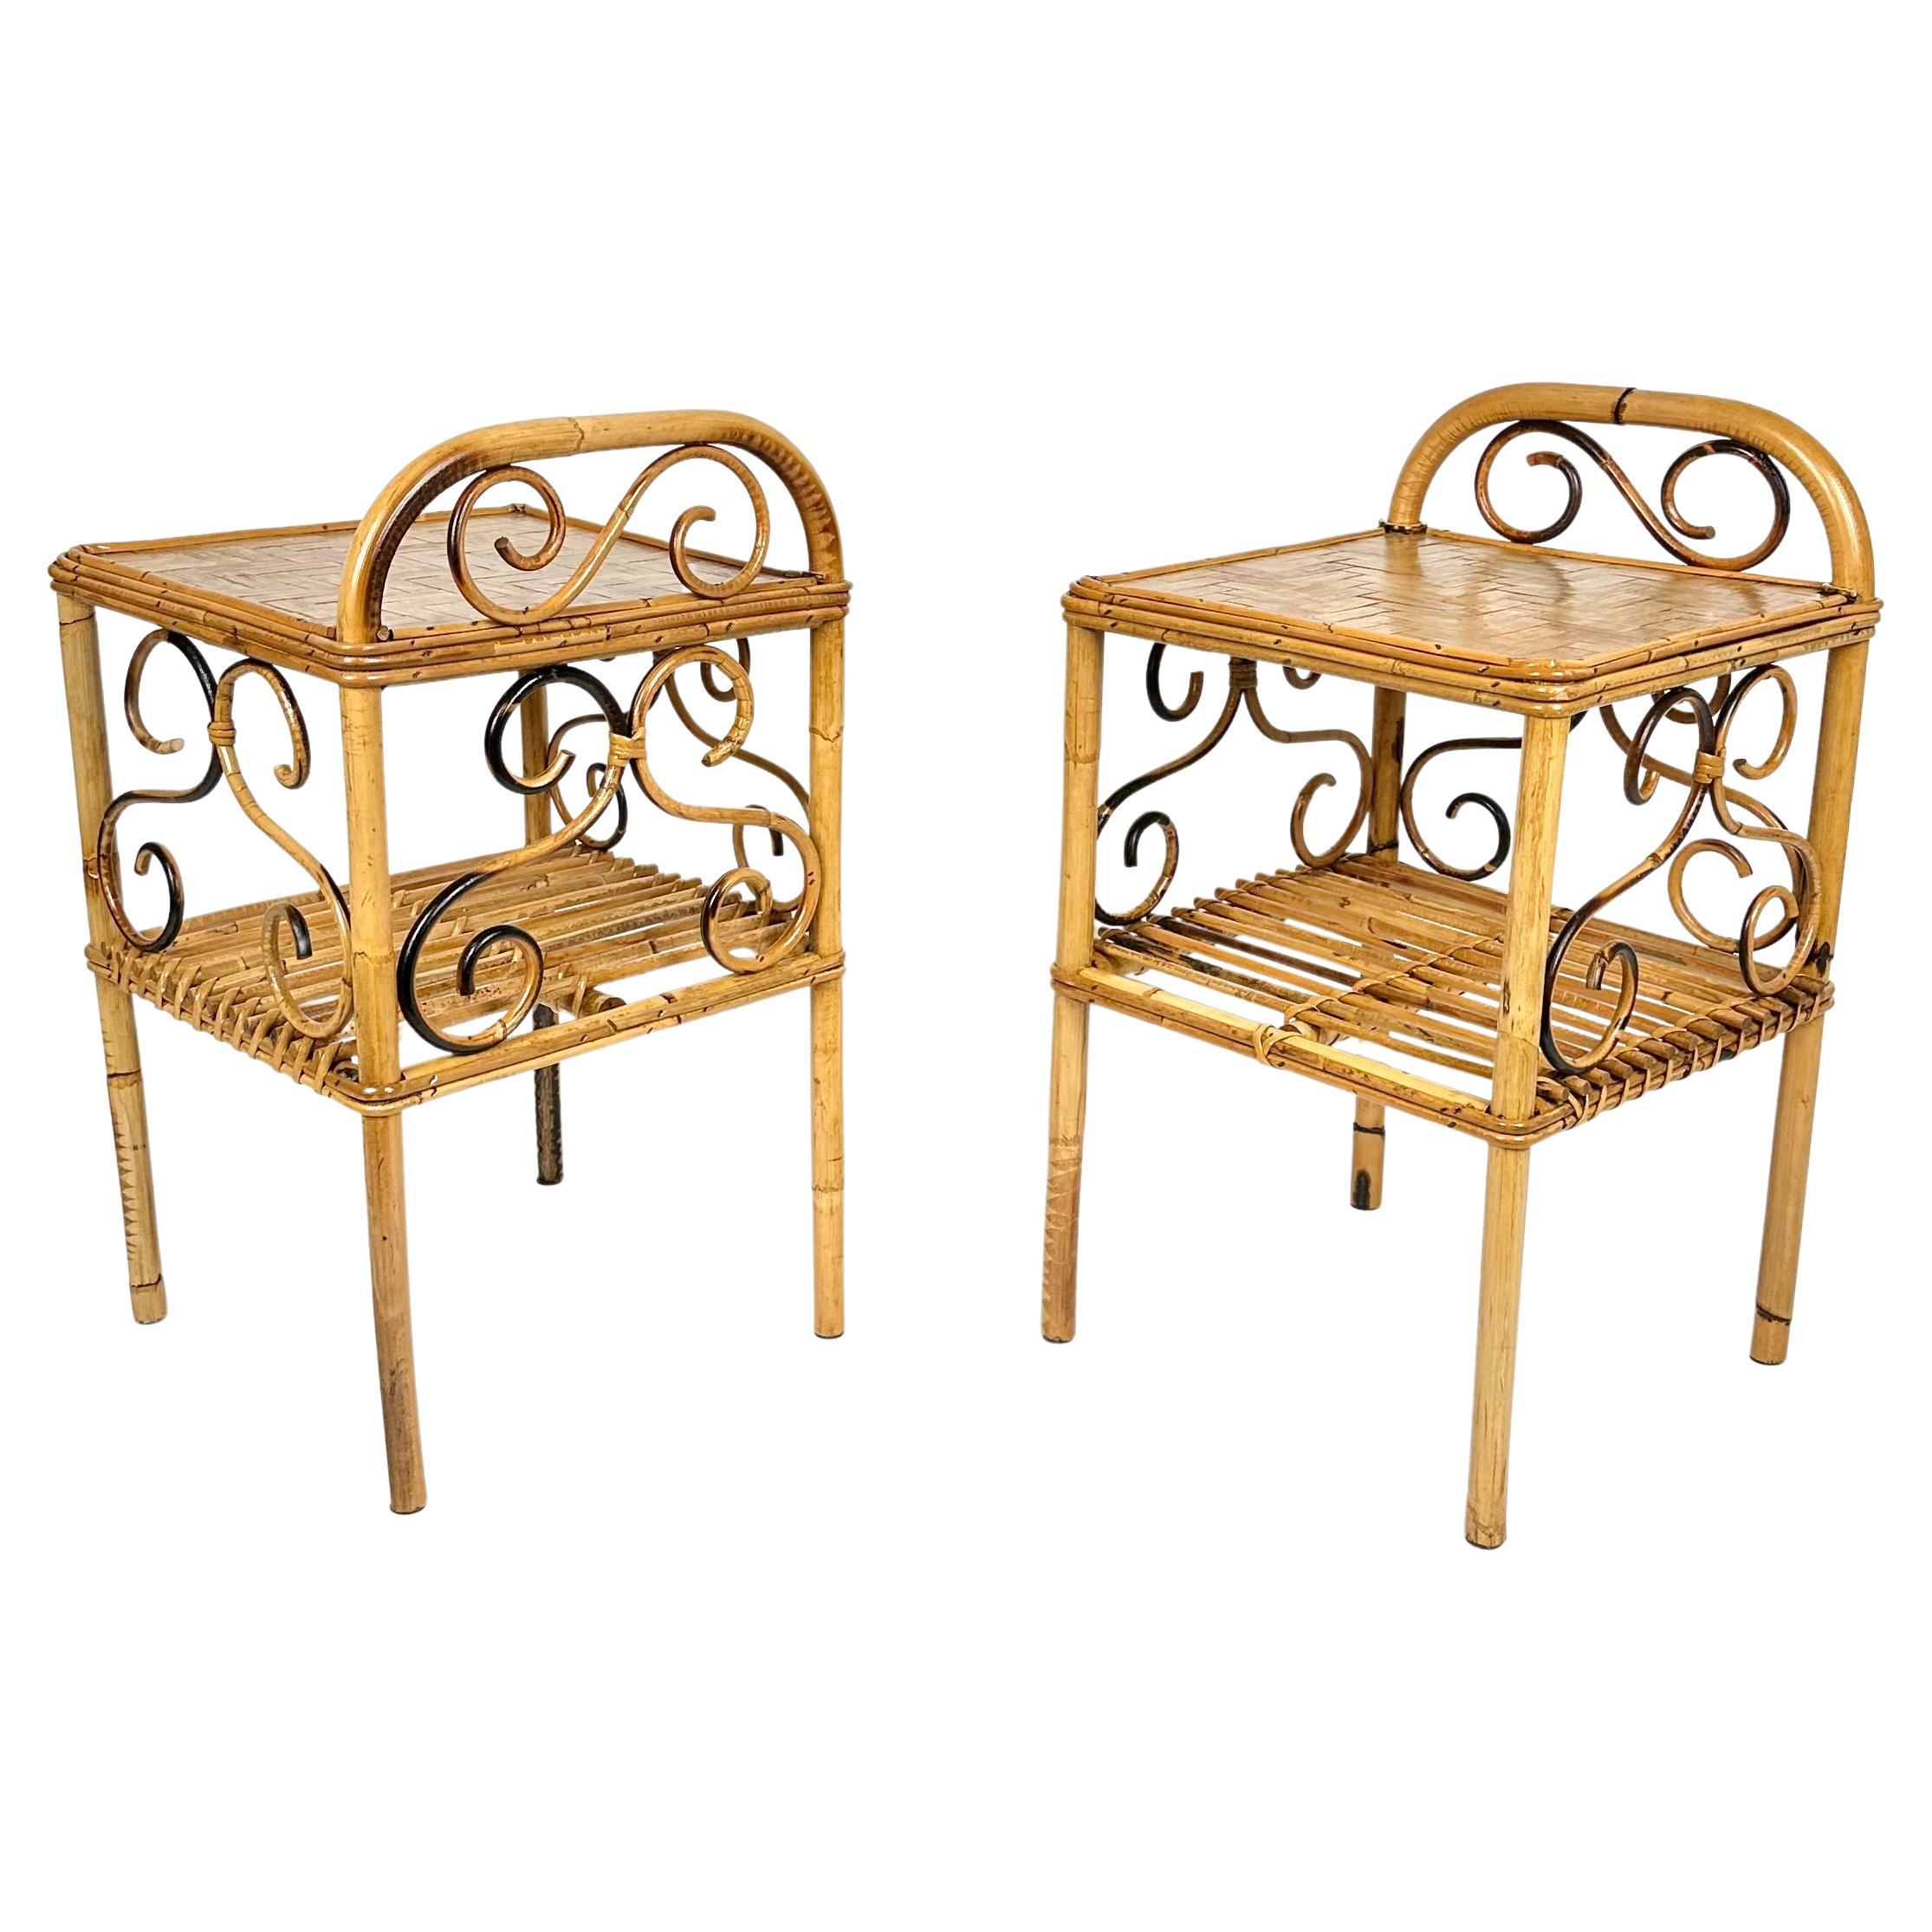 Italian Midcentury Pair of Bedside Tables Nightstands in Bamboo and Rattan, Italy, 1960s